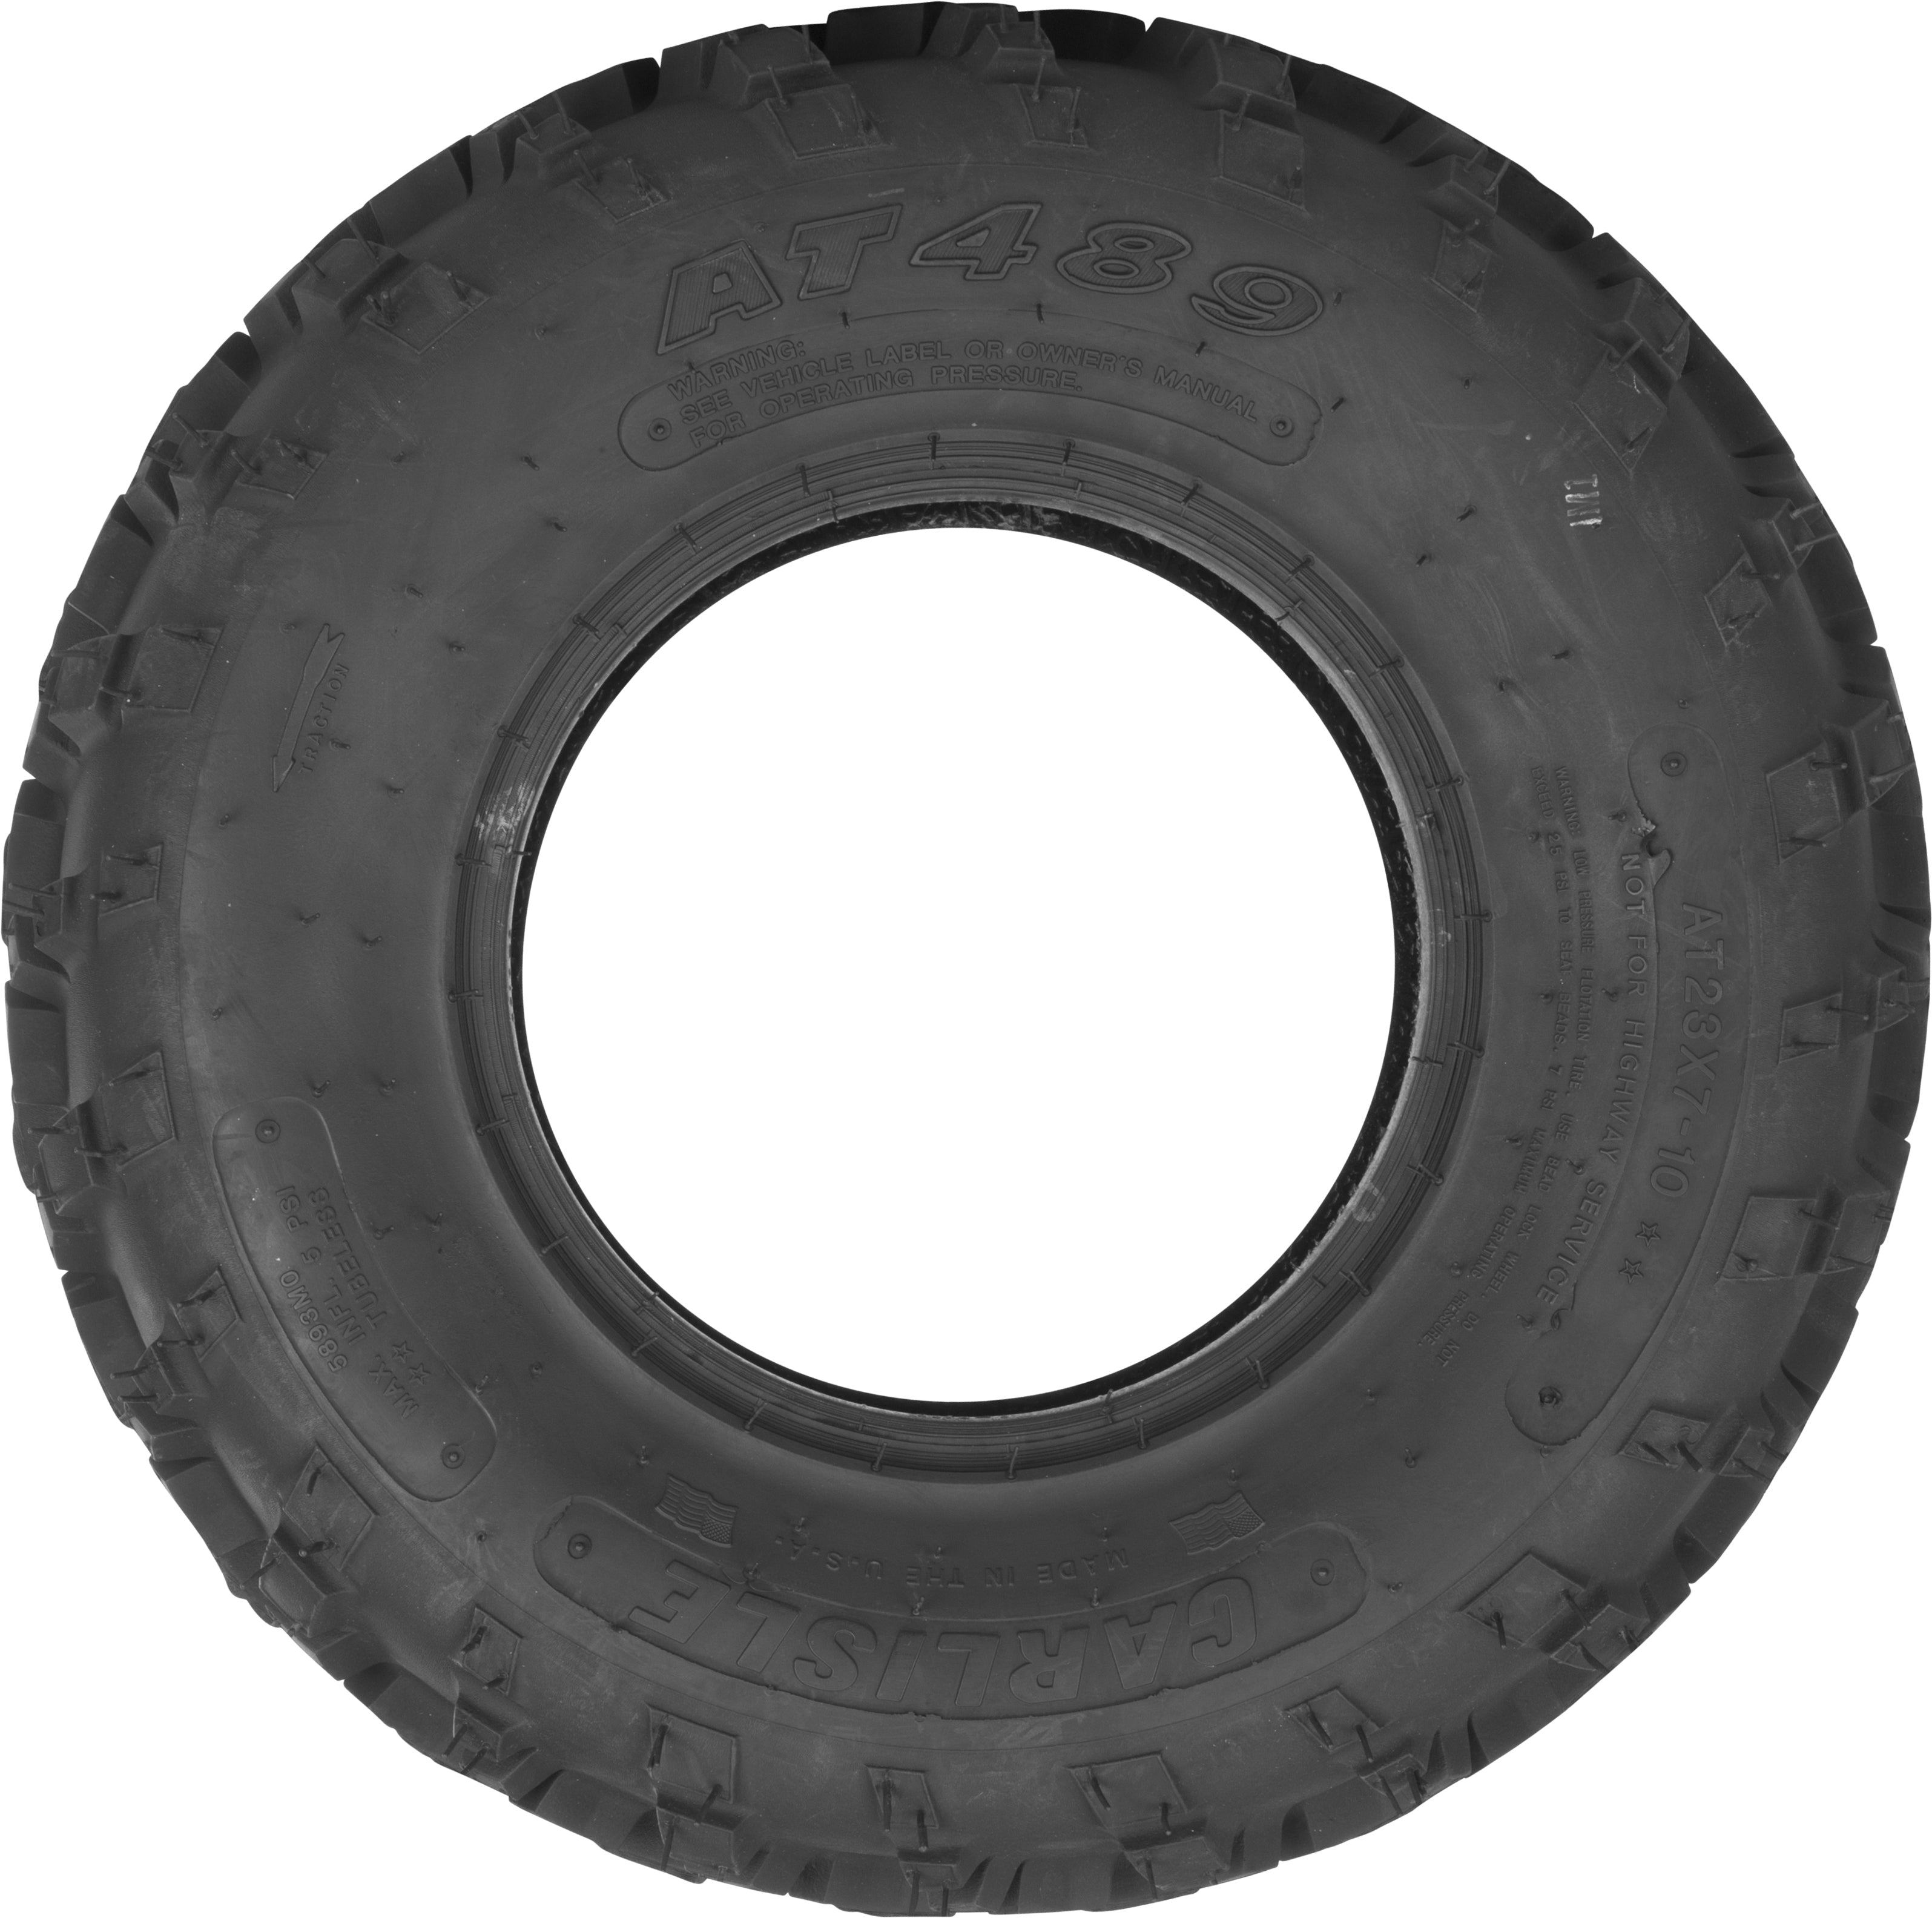 Tire At489 Front 24x8 11 Bias